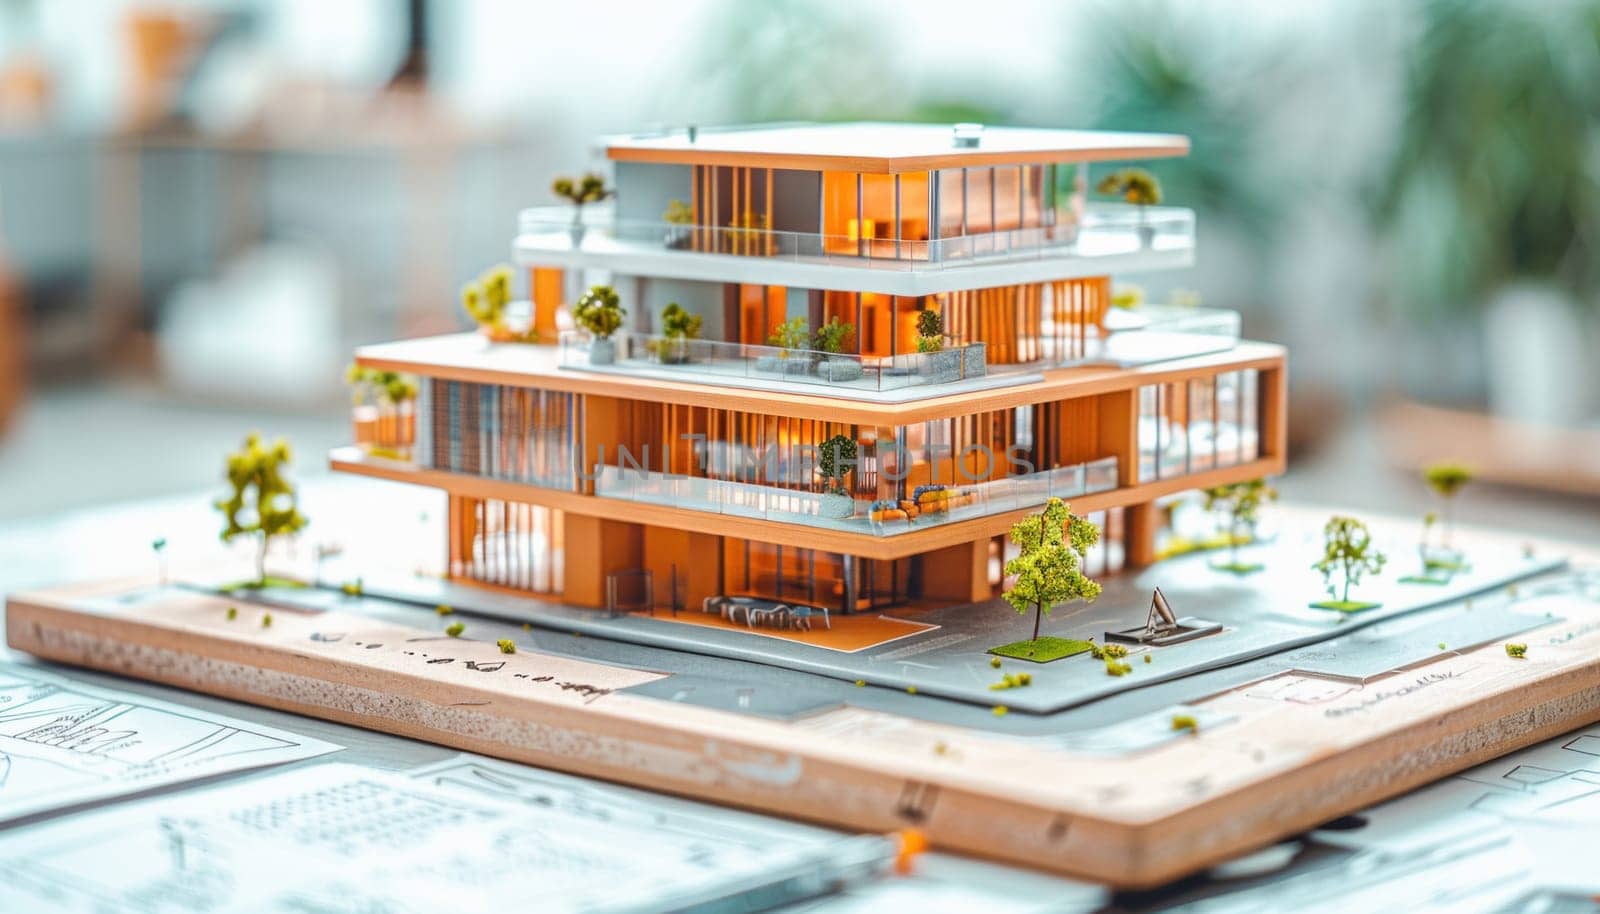 A scale model of a house rests on a wooden table, incorporating elements of urban design and mixeduse architecture